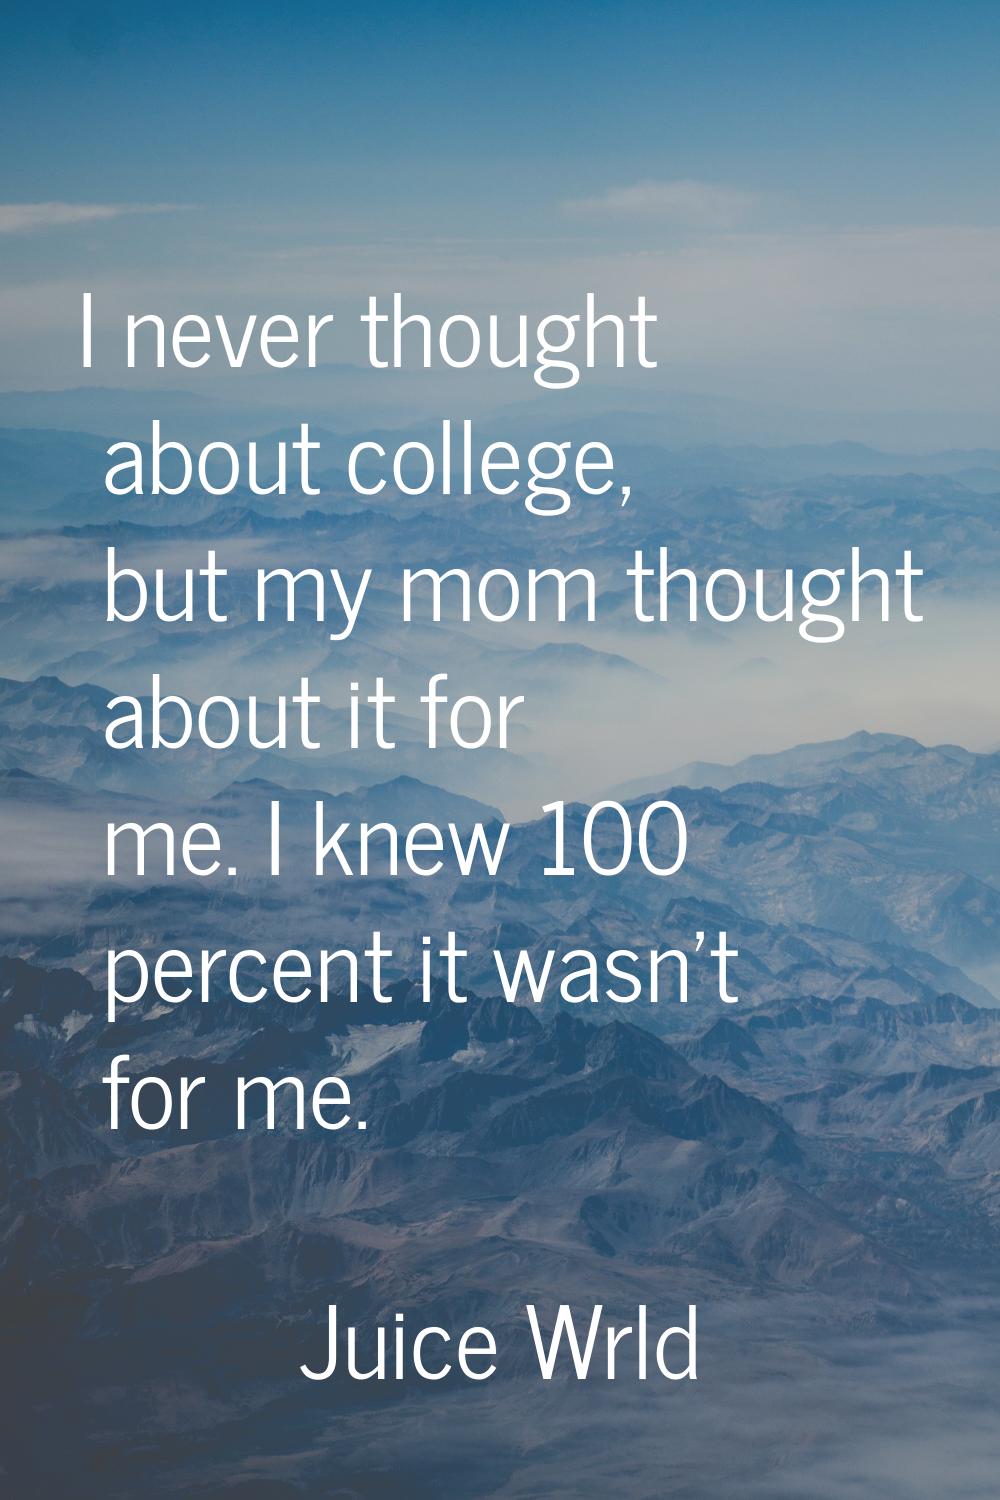 I never thought about college, but my mom thought about it for me. I knew 100 percent it wasn't for